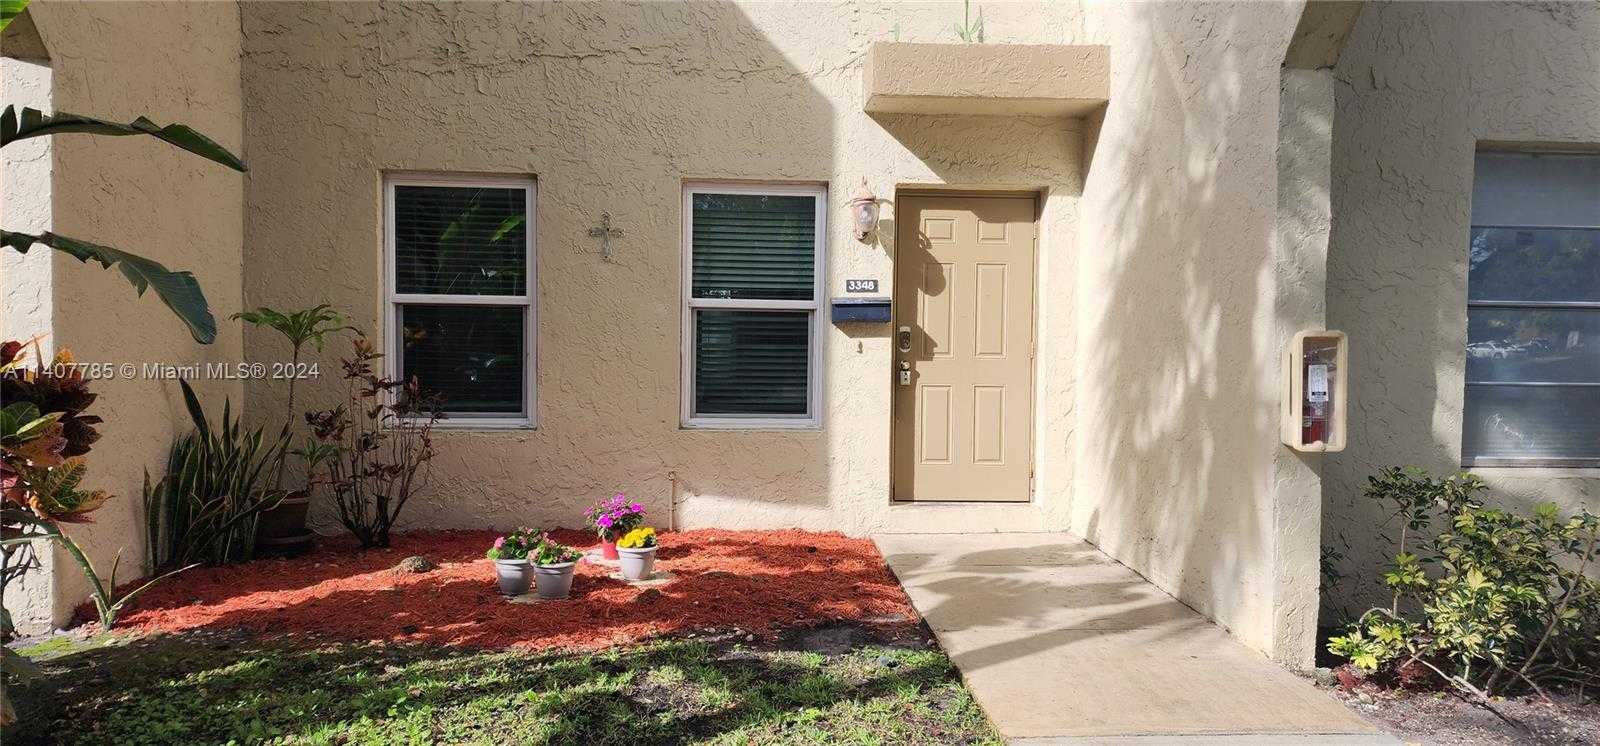 View Coral Springs, FL 33065 townhome